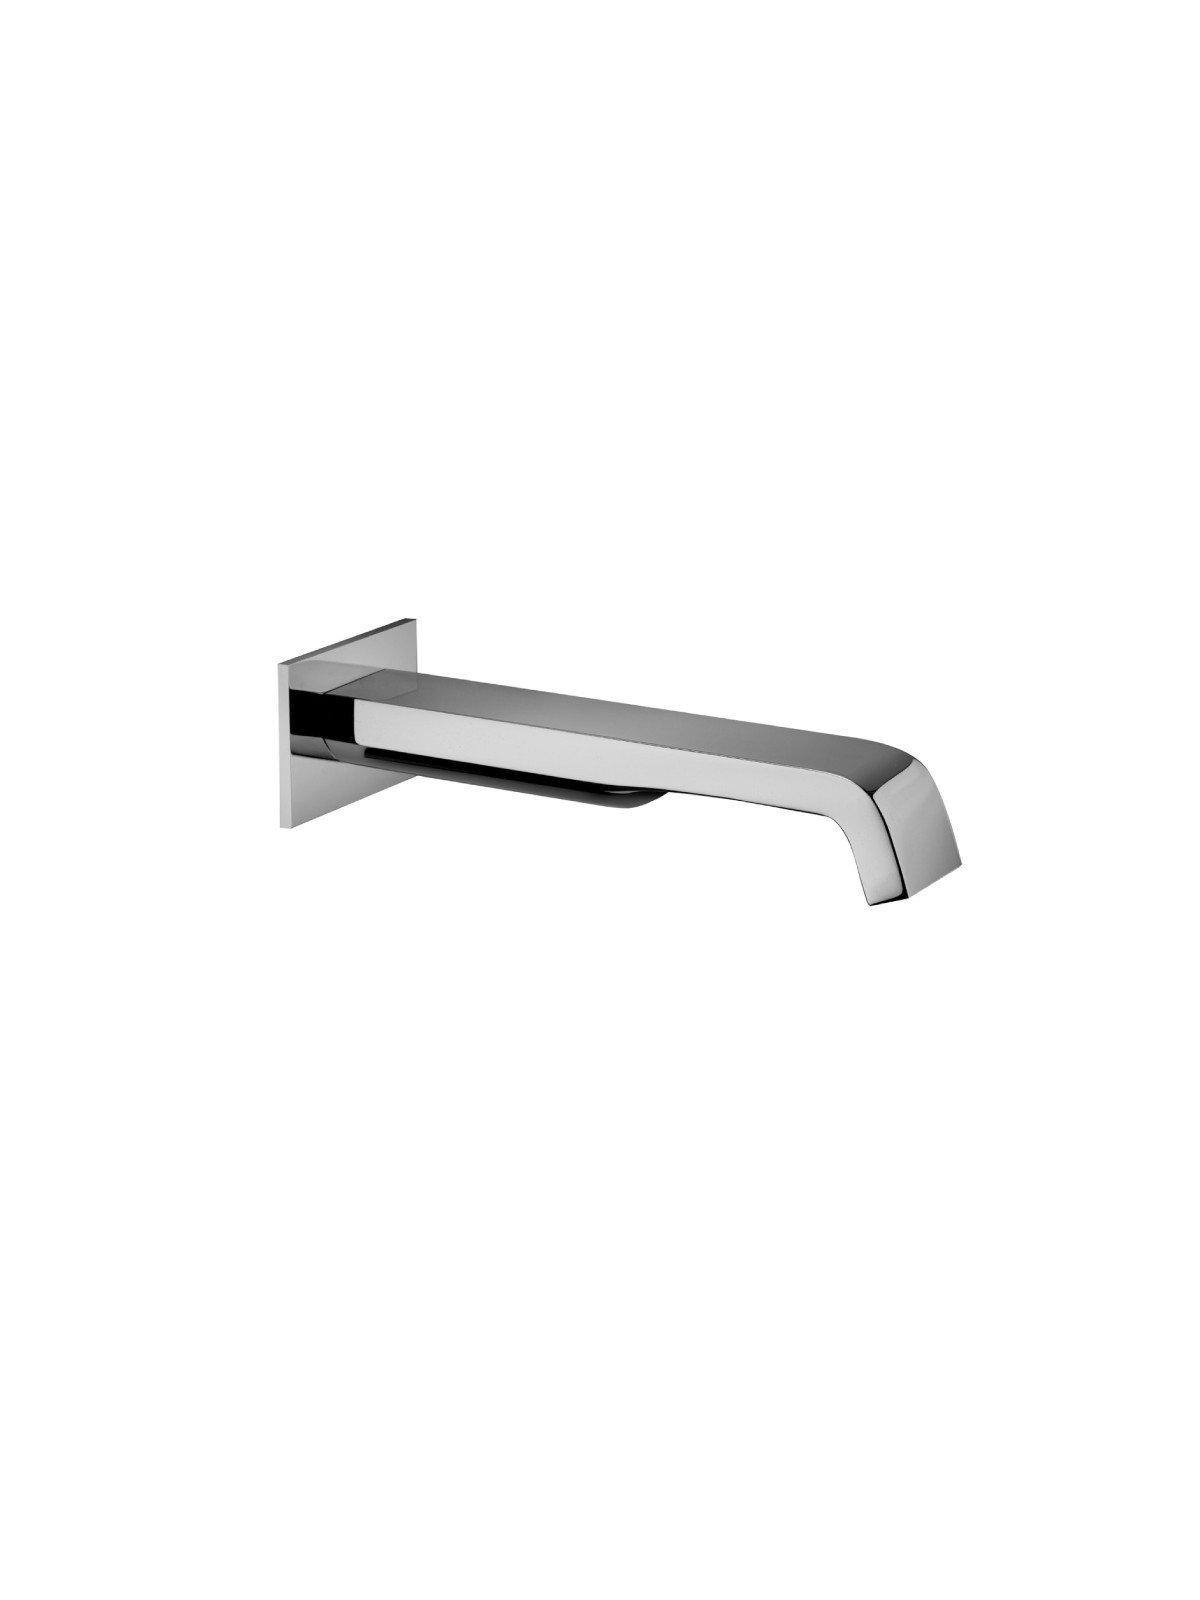 Wall-mounted spout for bath mixer